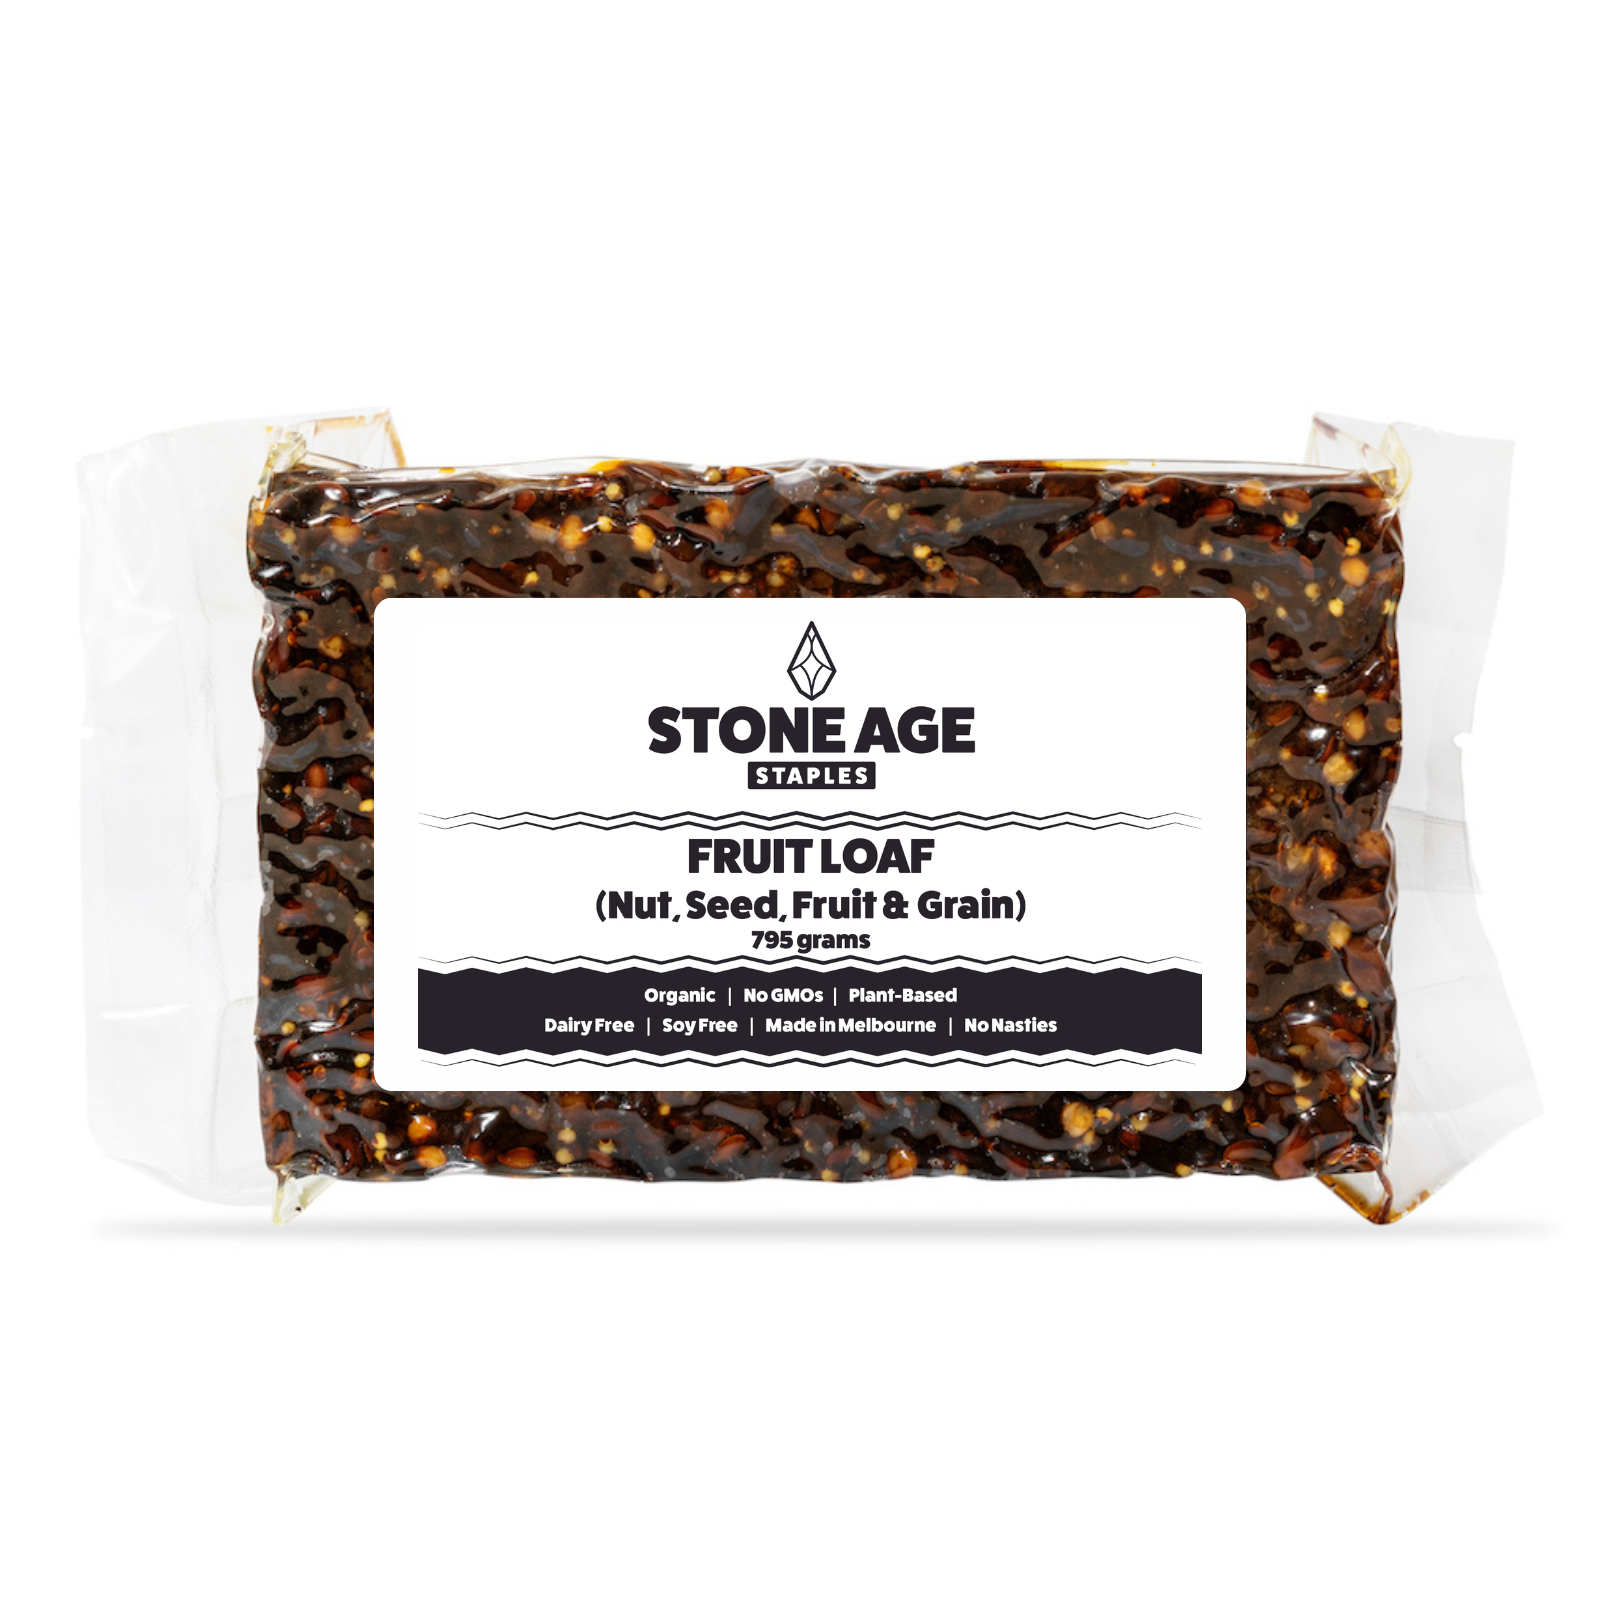 Product shot of Stone Age Staples Fruit Loaf on white background